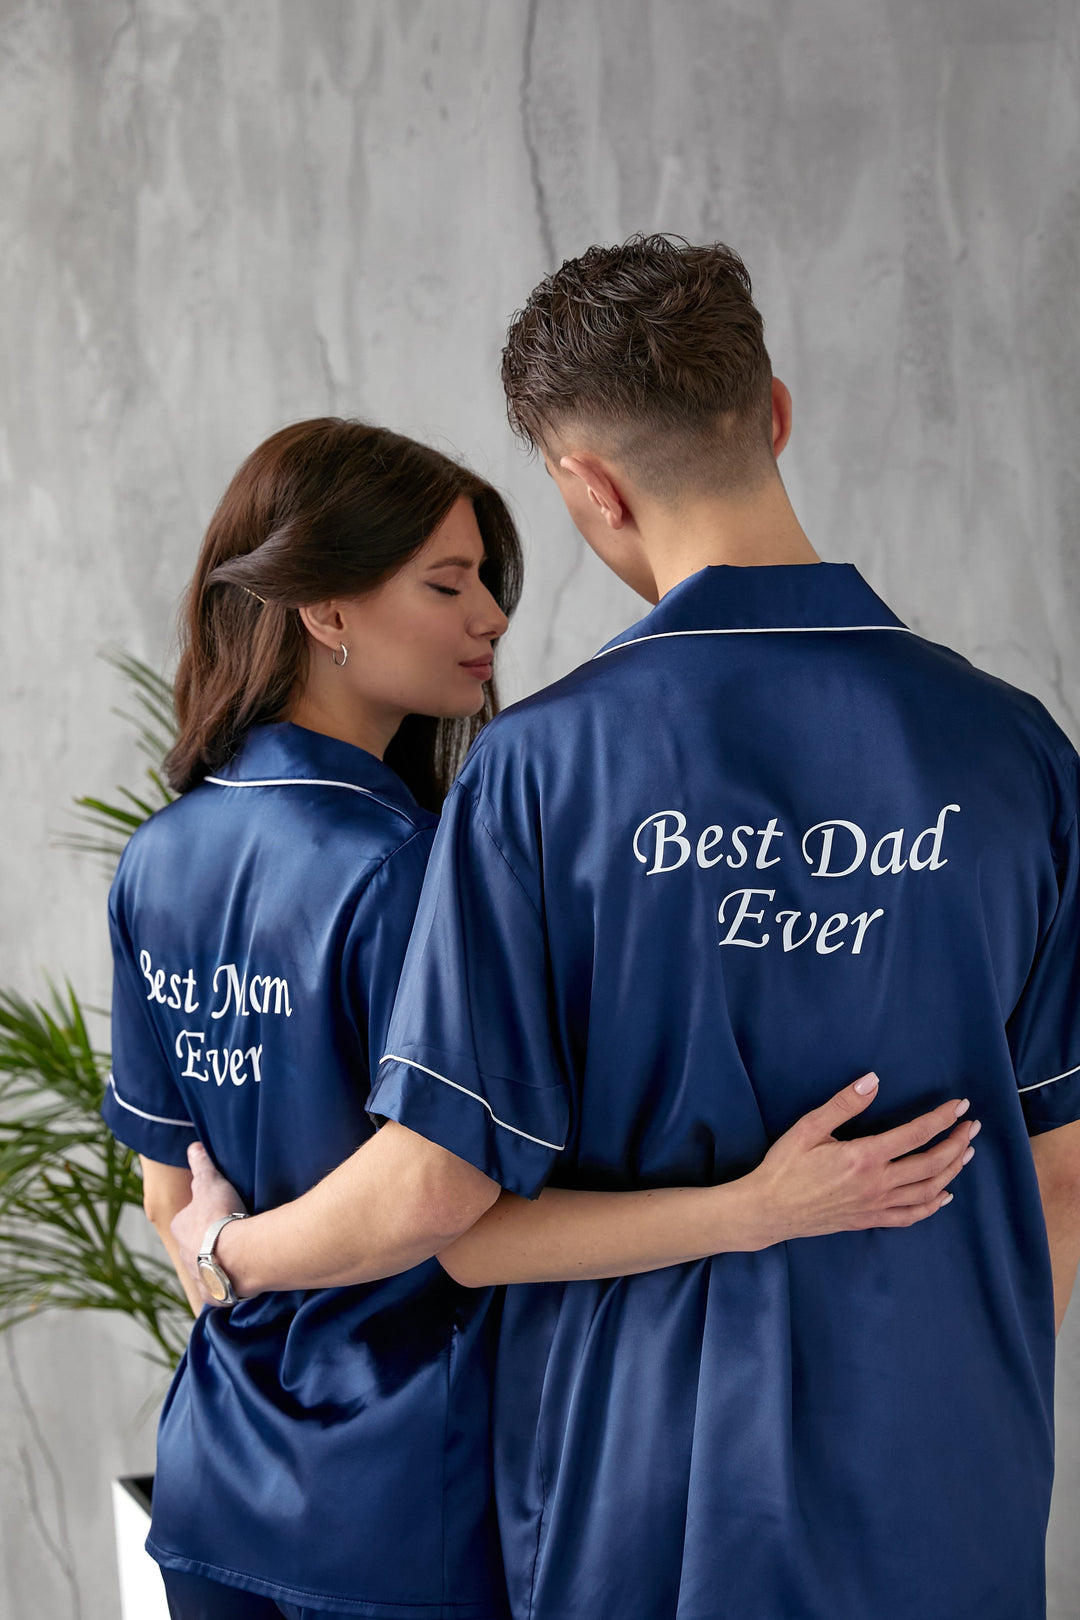 Best Mom and Best Dad Ever Pajama Sets